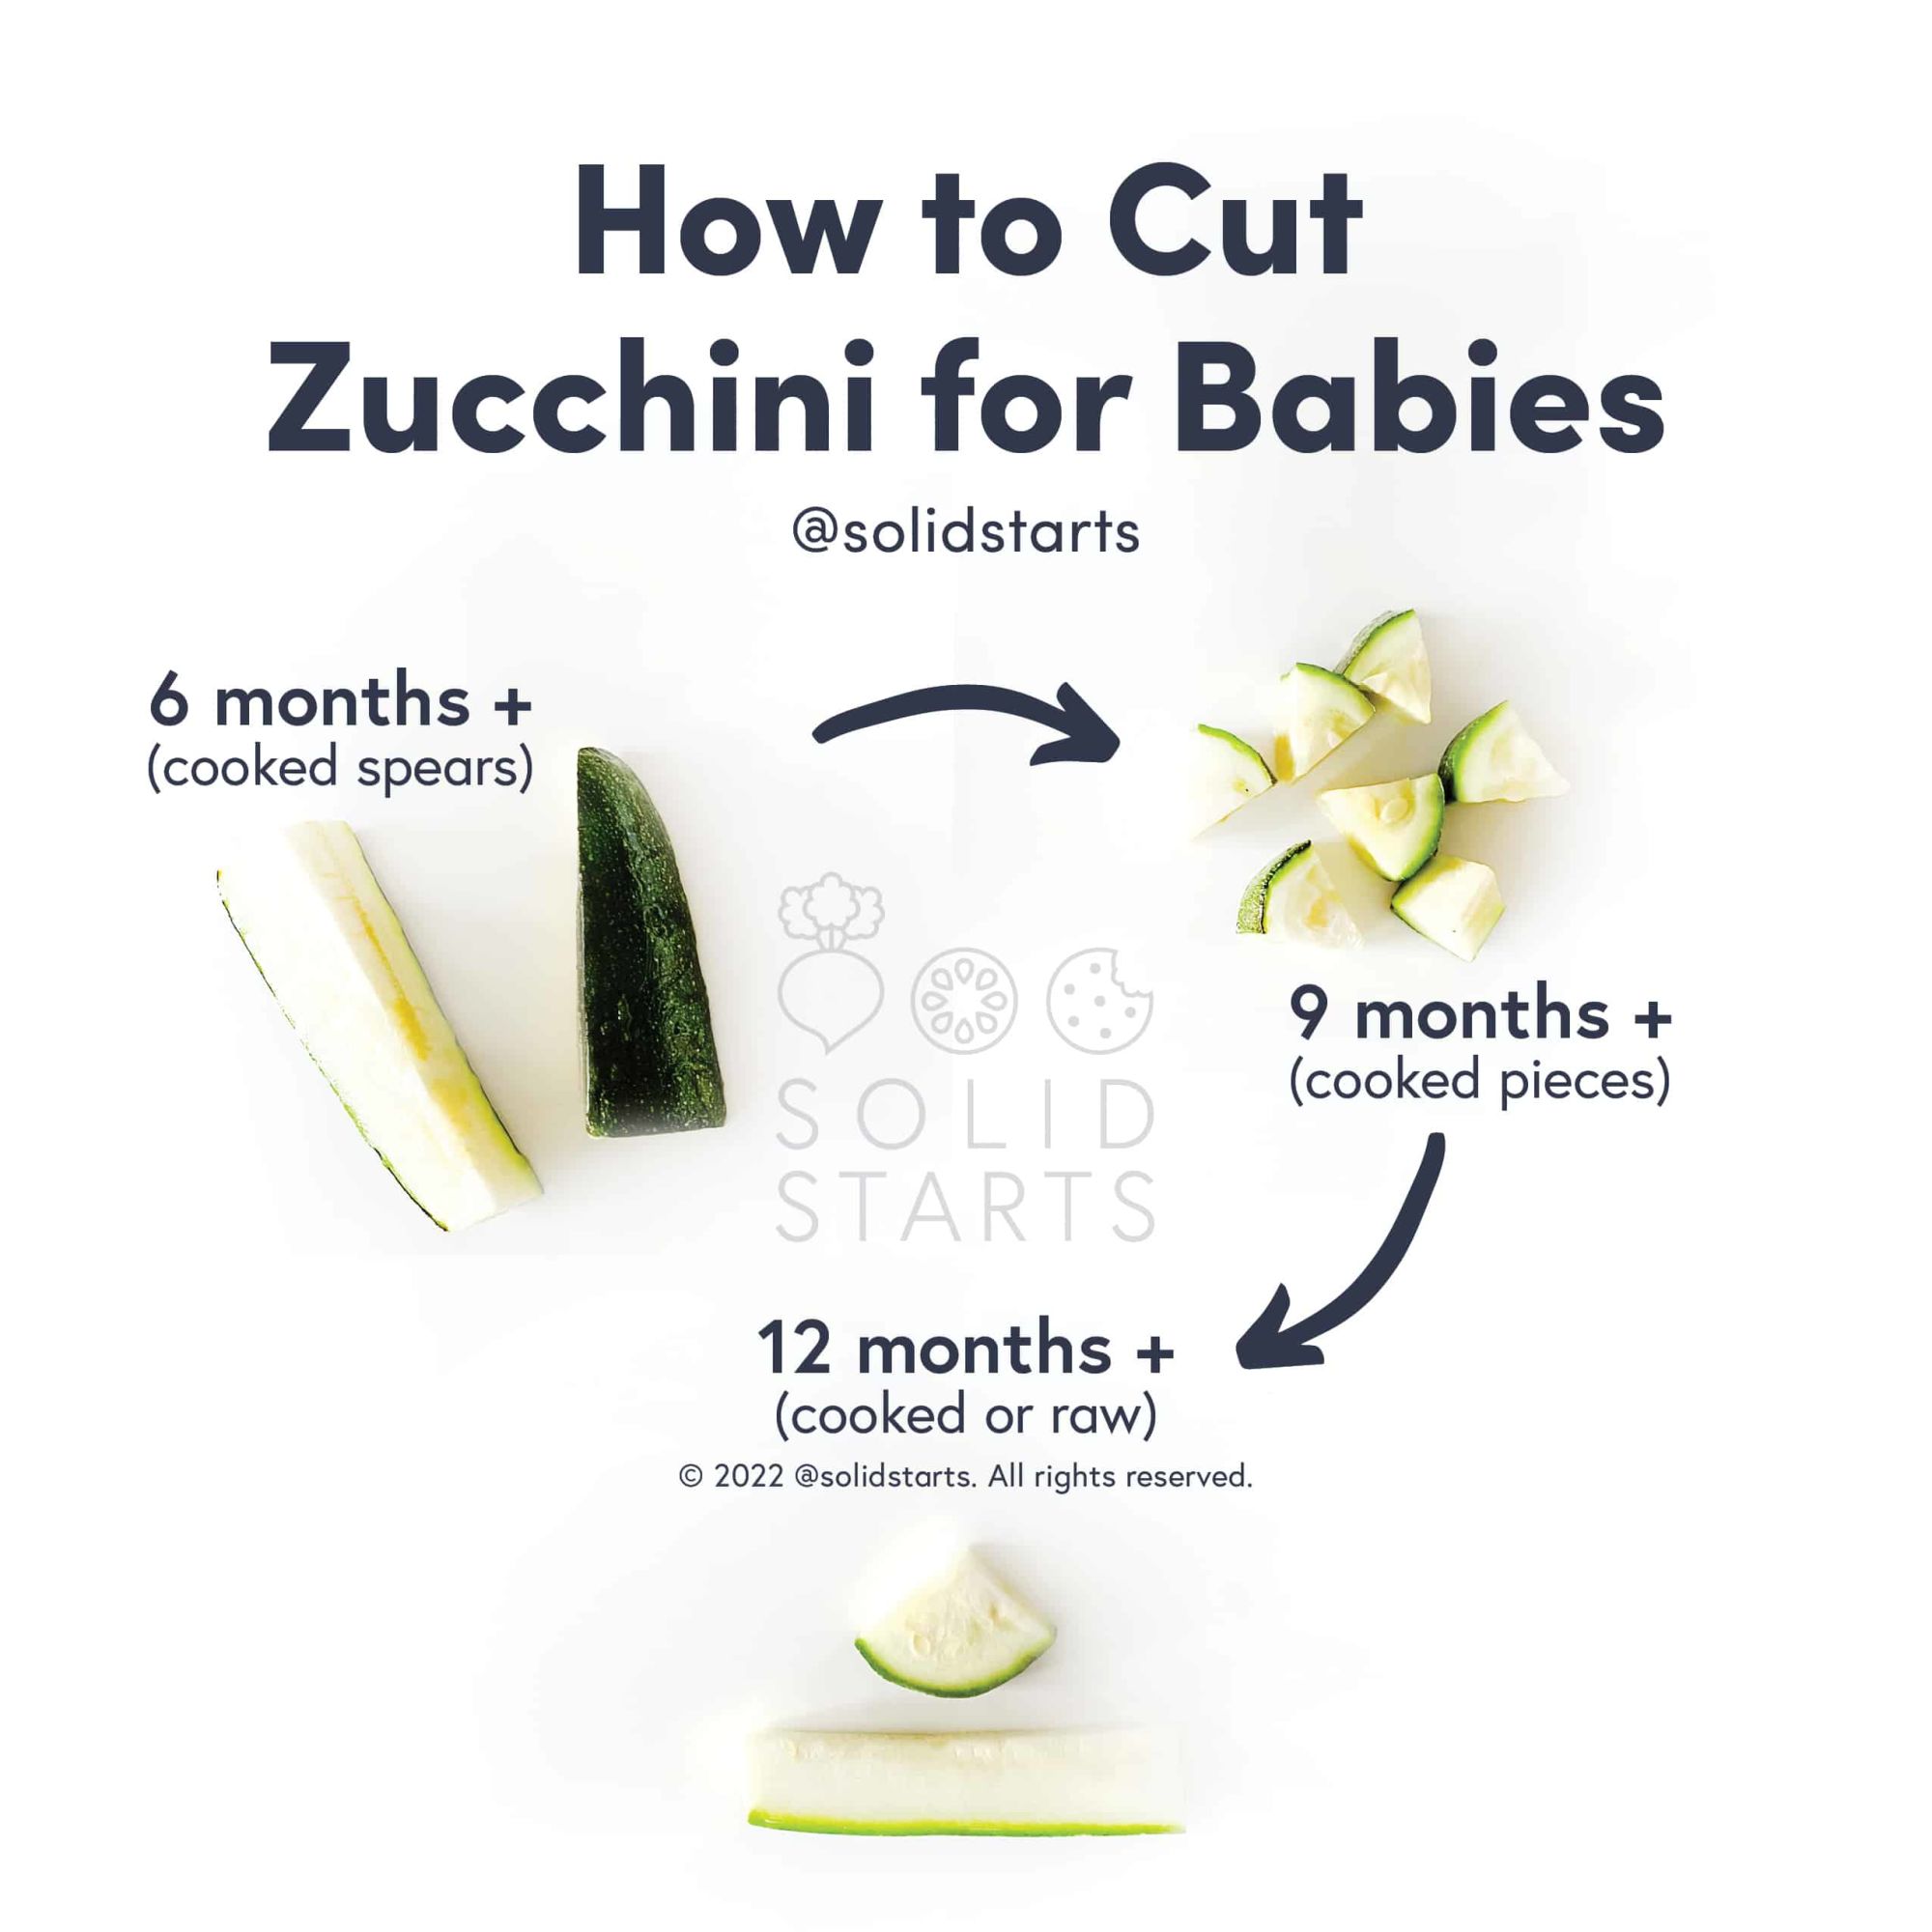 How to Cut Zucchini for Babies